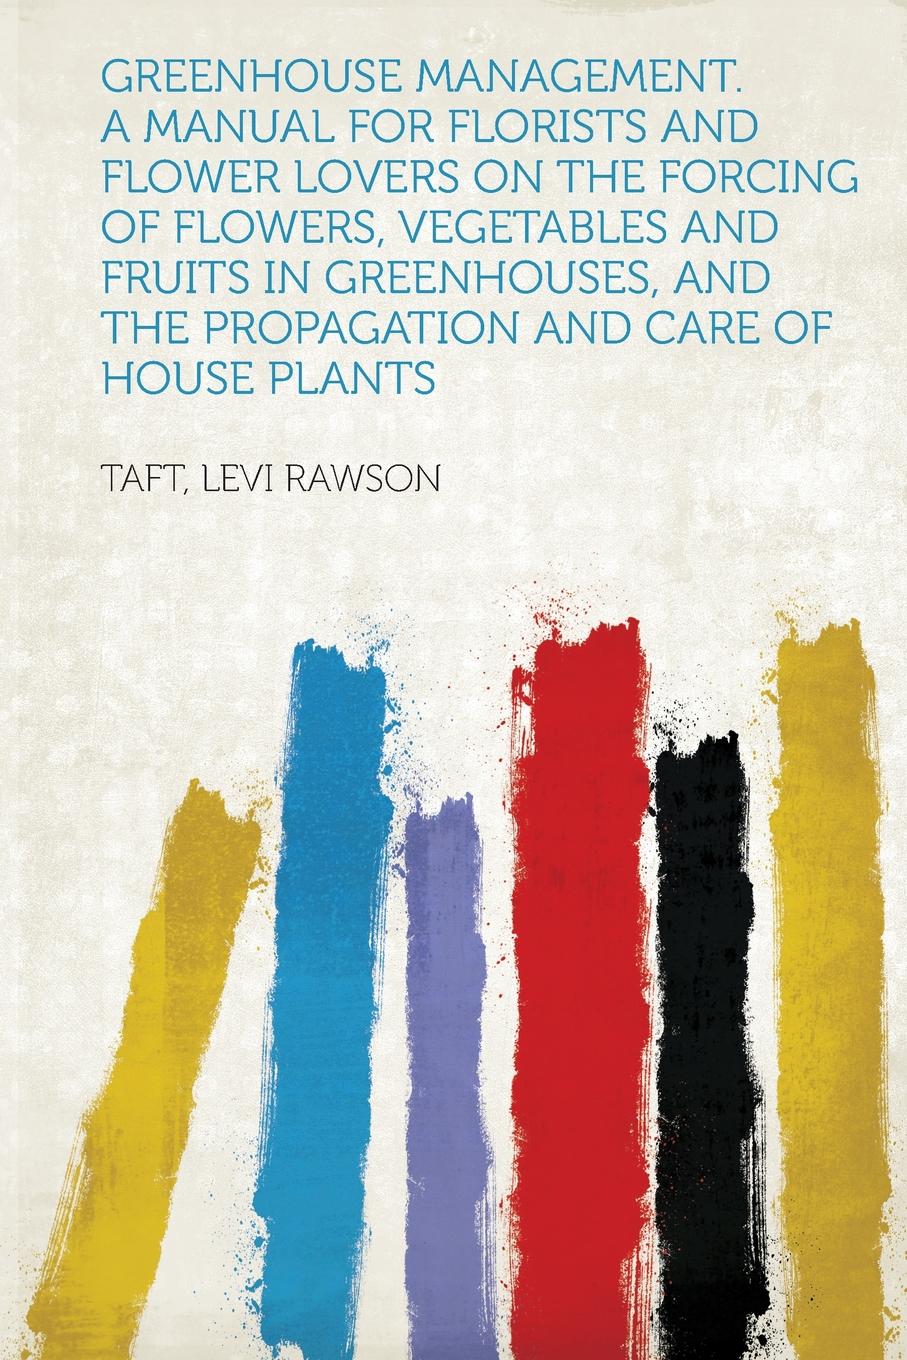 Greenhouse Management. A Manual for Florists and Flower Lovers on the Forcing of Flowers, Vegetables and Fruits in Greenhouses, and the Propagation and Care of House Plants